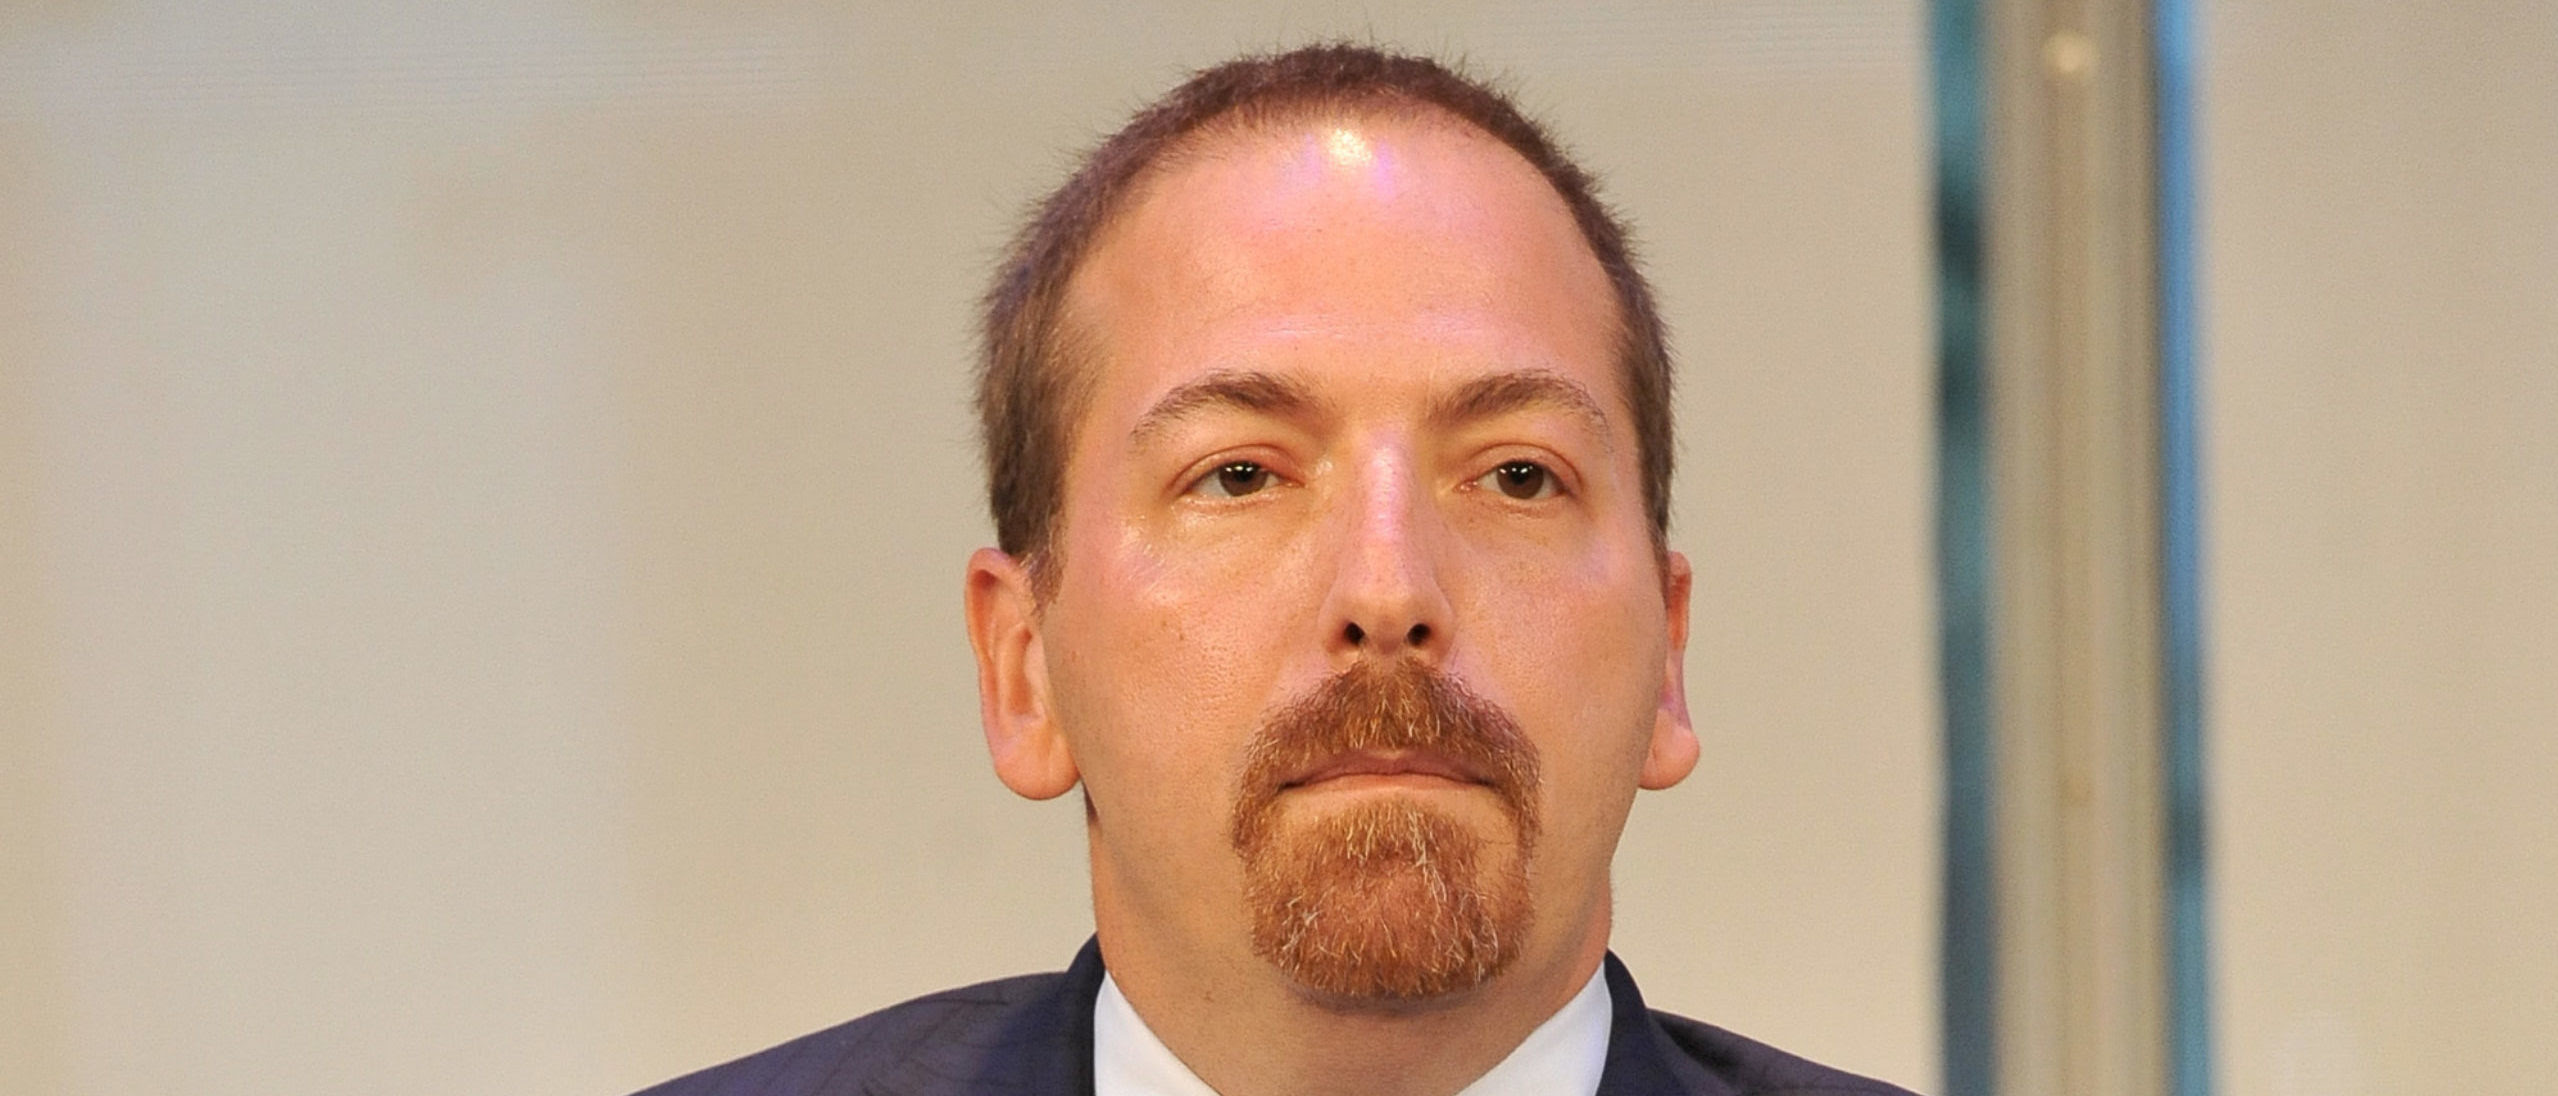 REPORT: Chuck Todd Possibly On The Chopping Block Over Poor Ratings